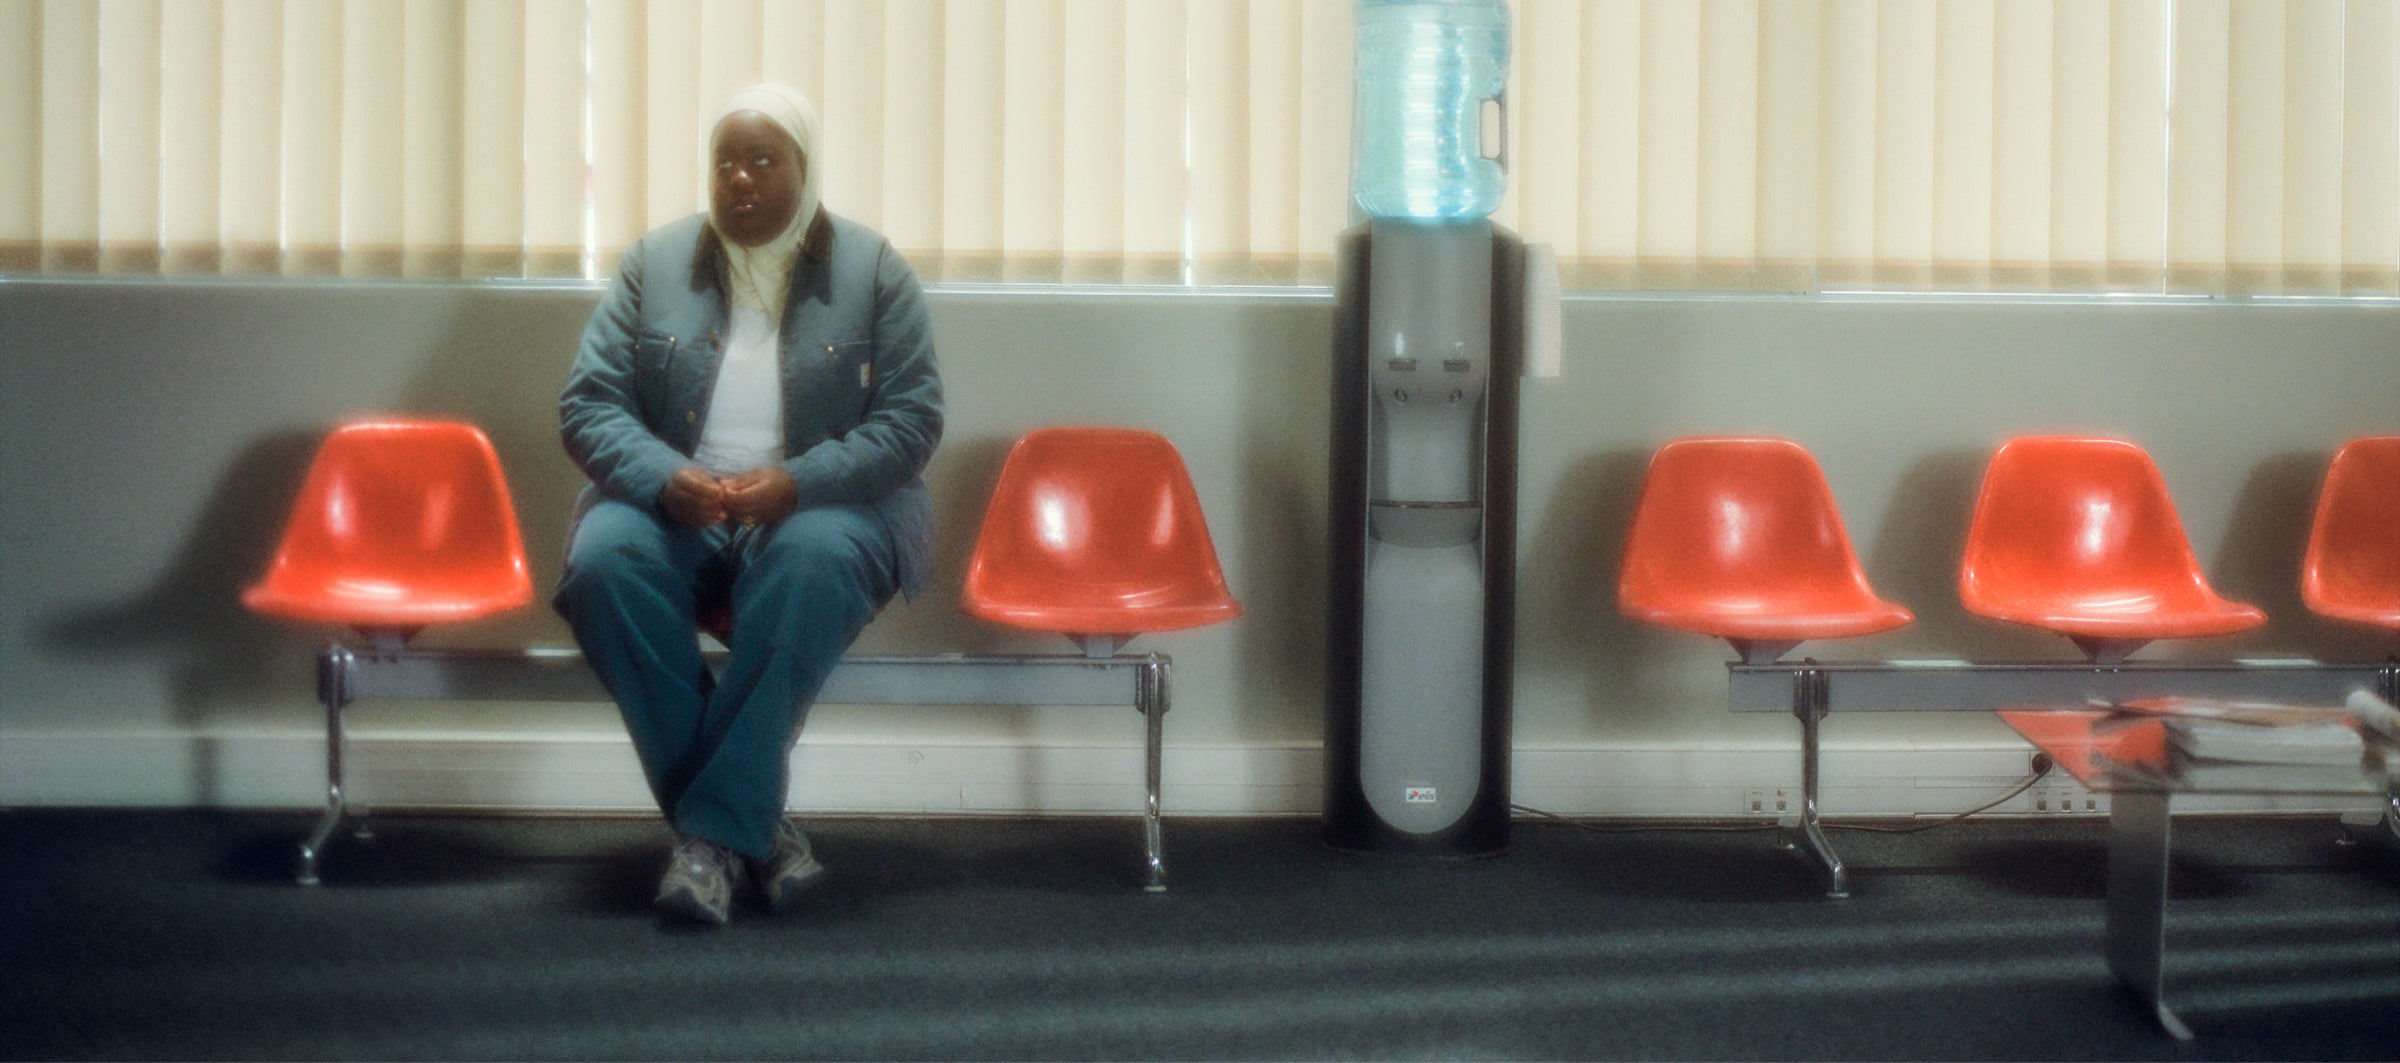 Model sitting alone in waiting room